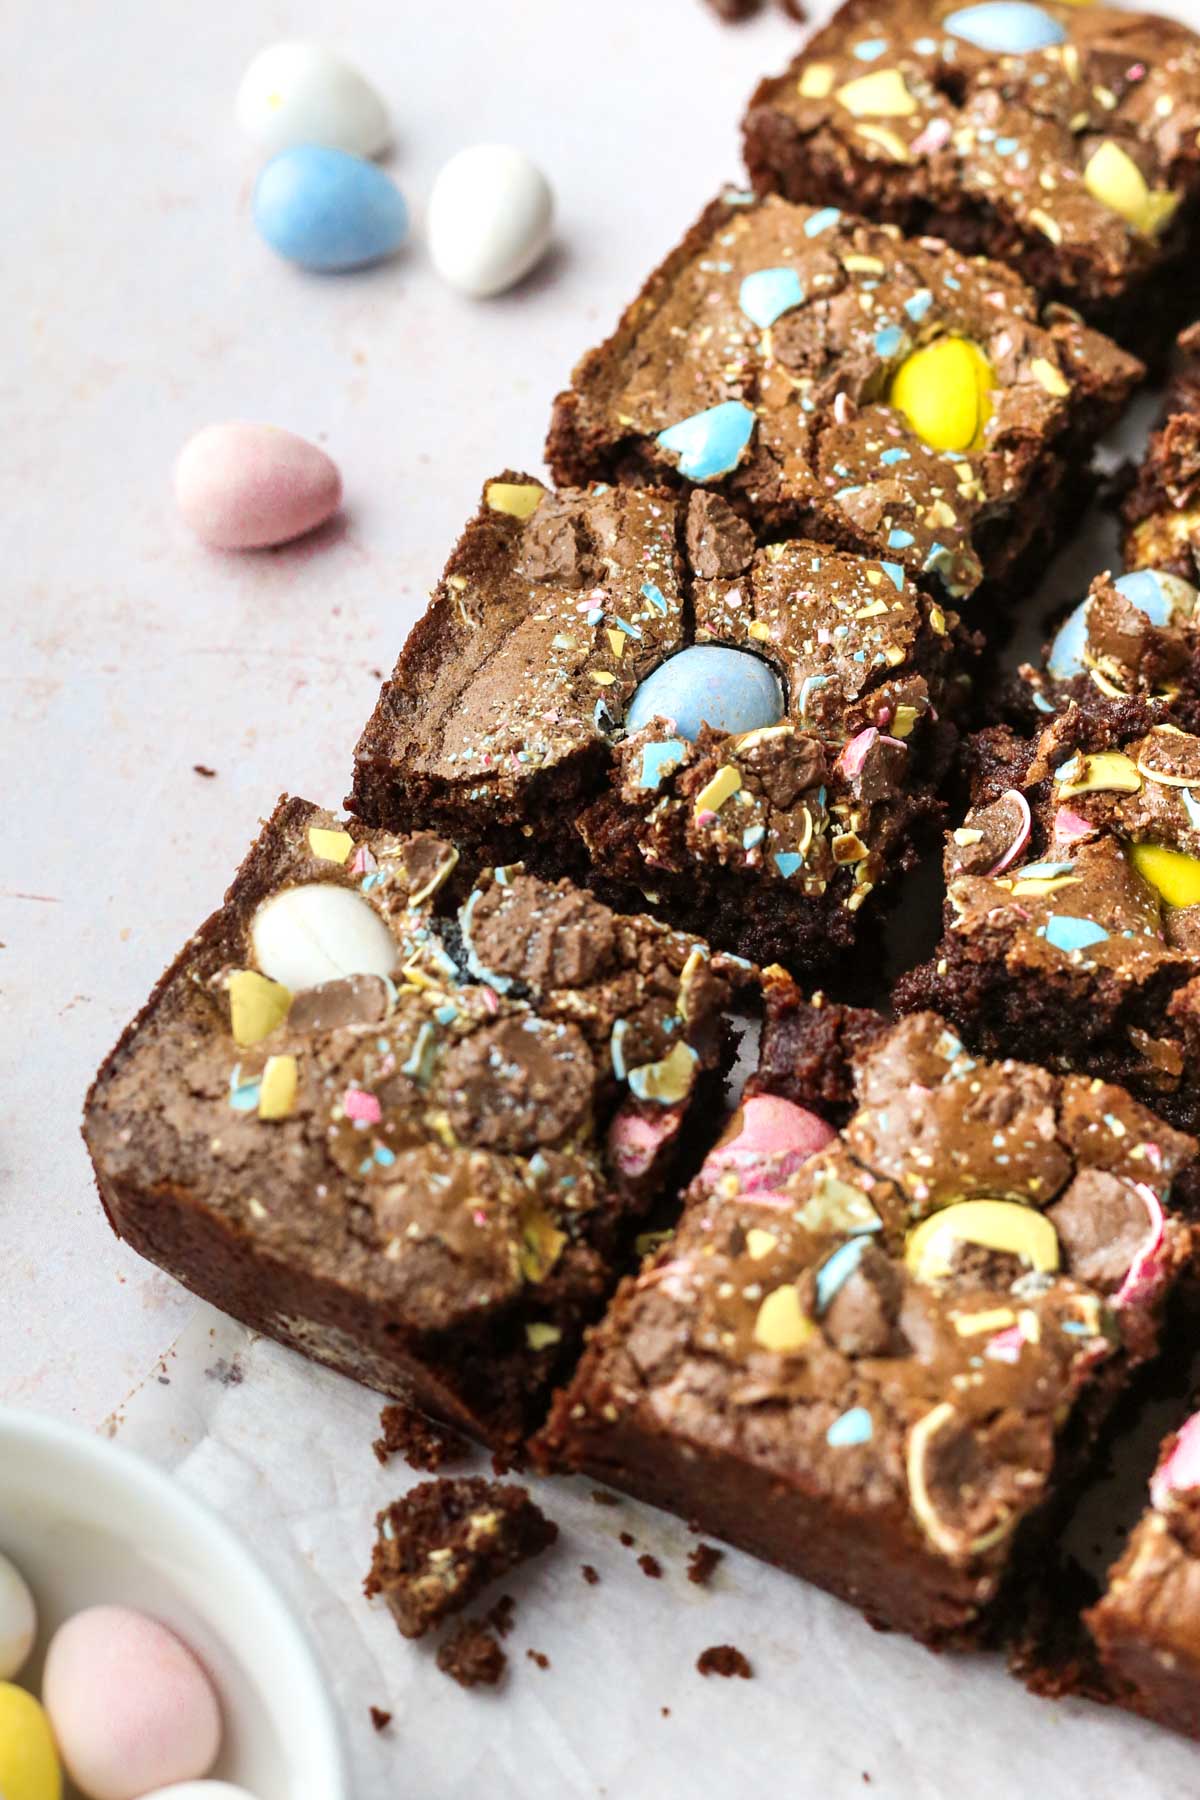 Angled shot of freshly cut brownies with colorful eggs baked into the top.